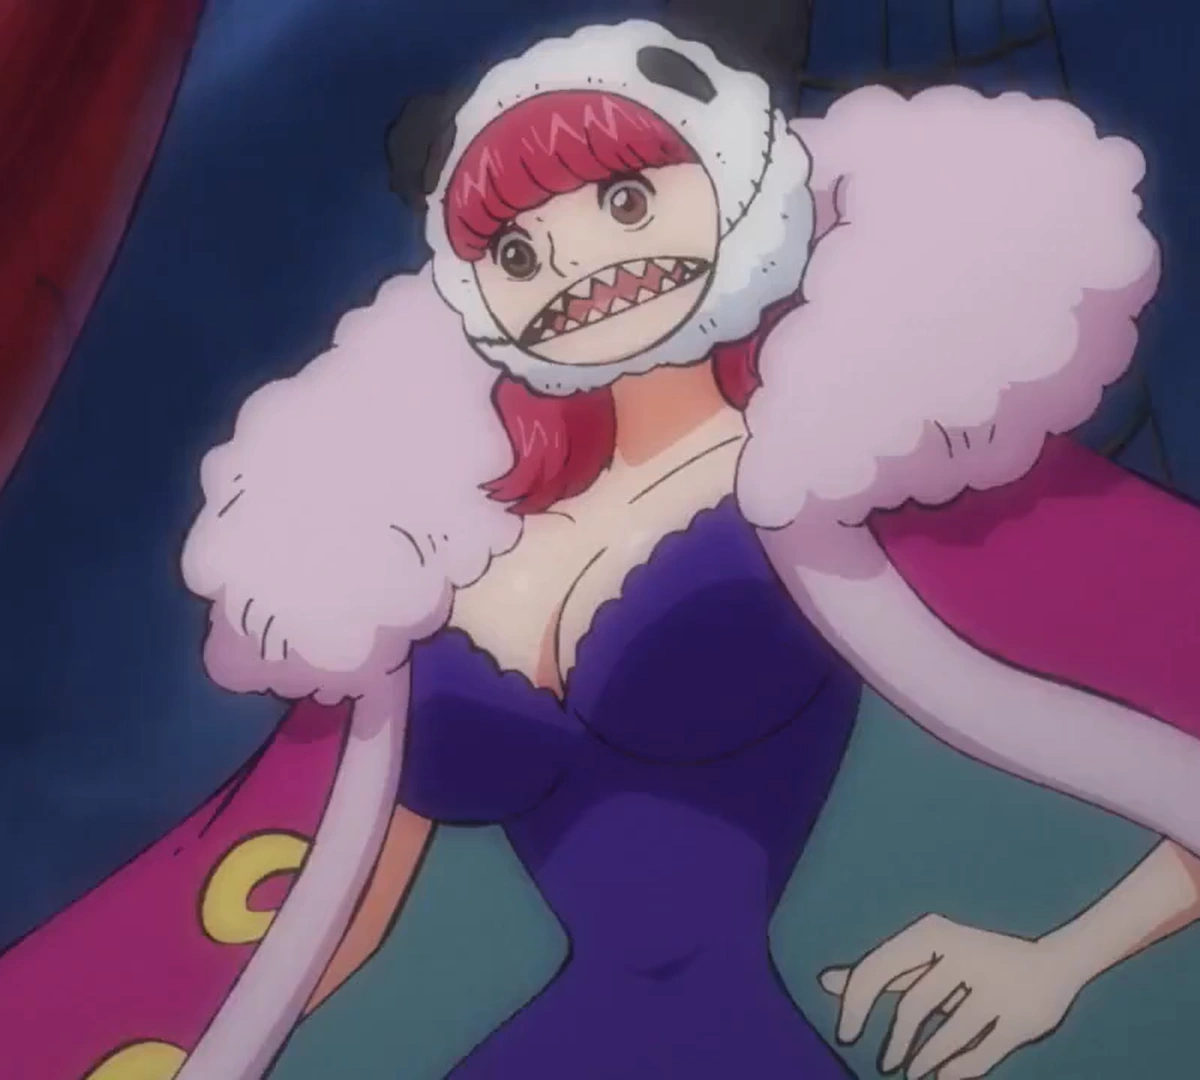 Charlotte Poire in One Piece. Still from the anime